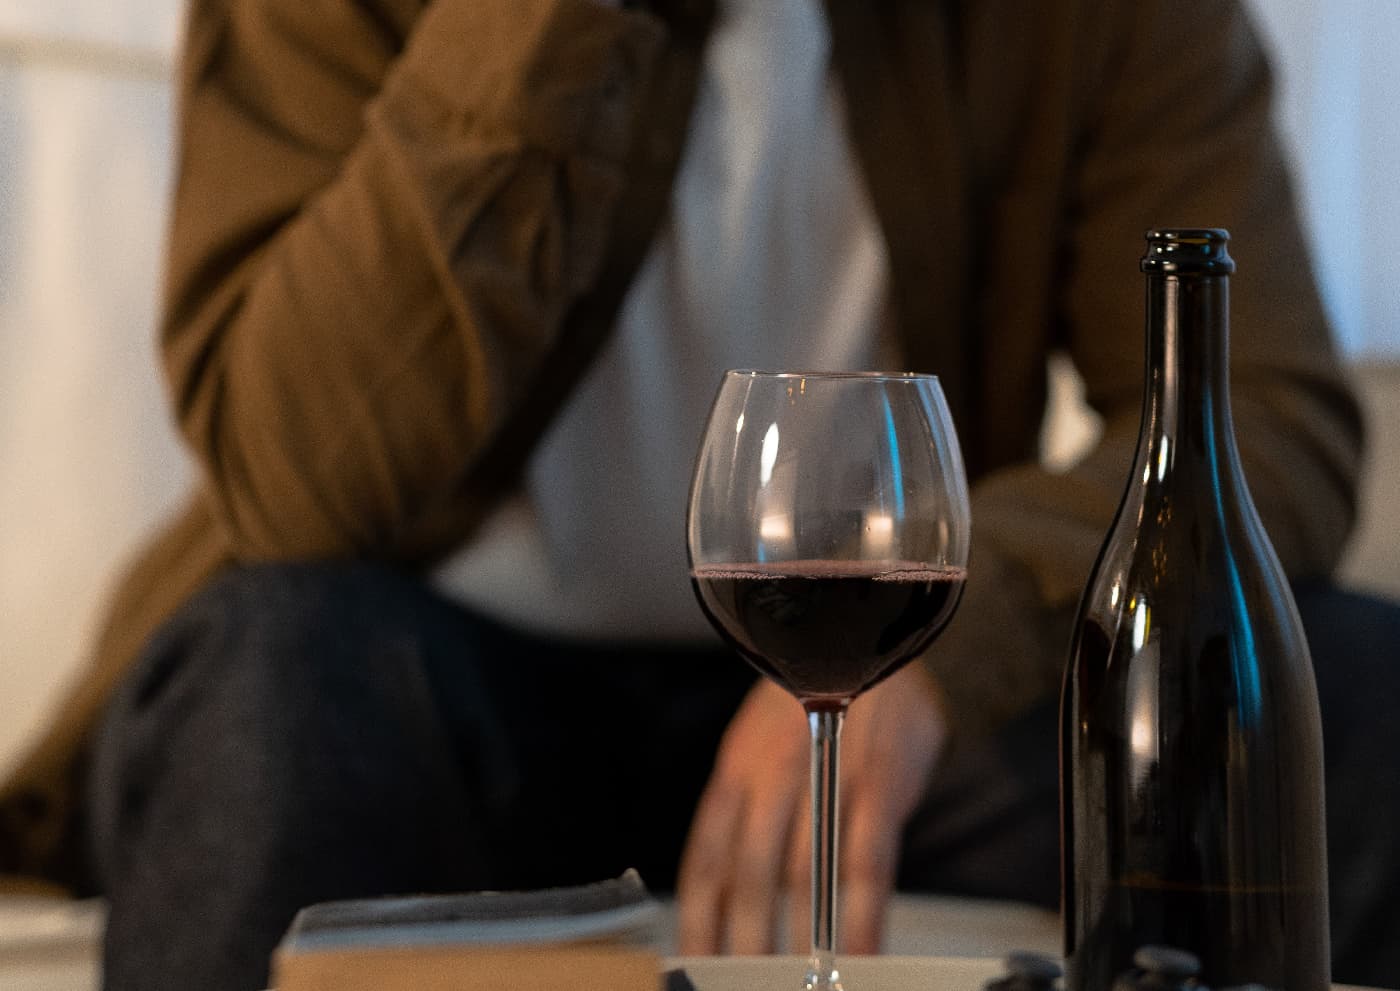 A close-up of a wine bottle in the foreground with a blurred figure of a man in the background, symbolizing the struggle and distance from alcohol faced during the journey of overcoming alcohol withdrawals.